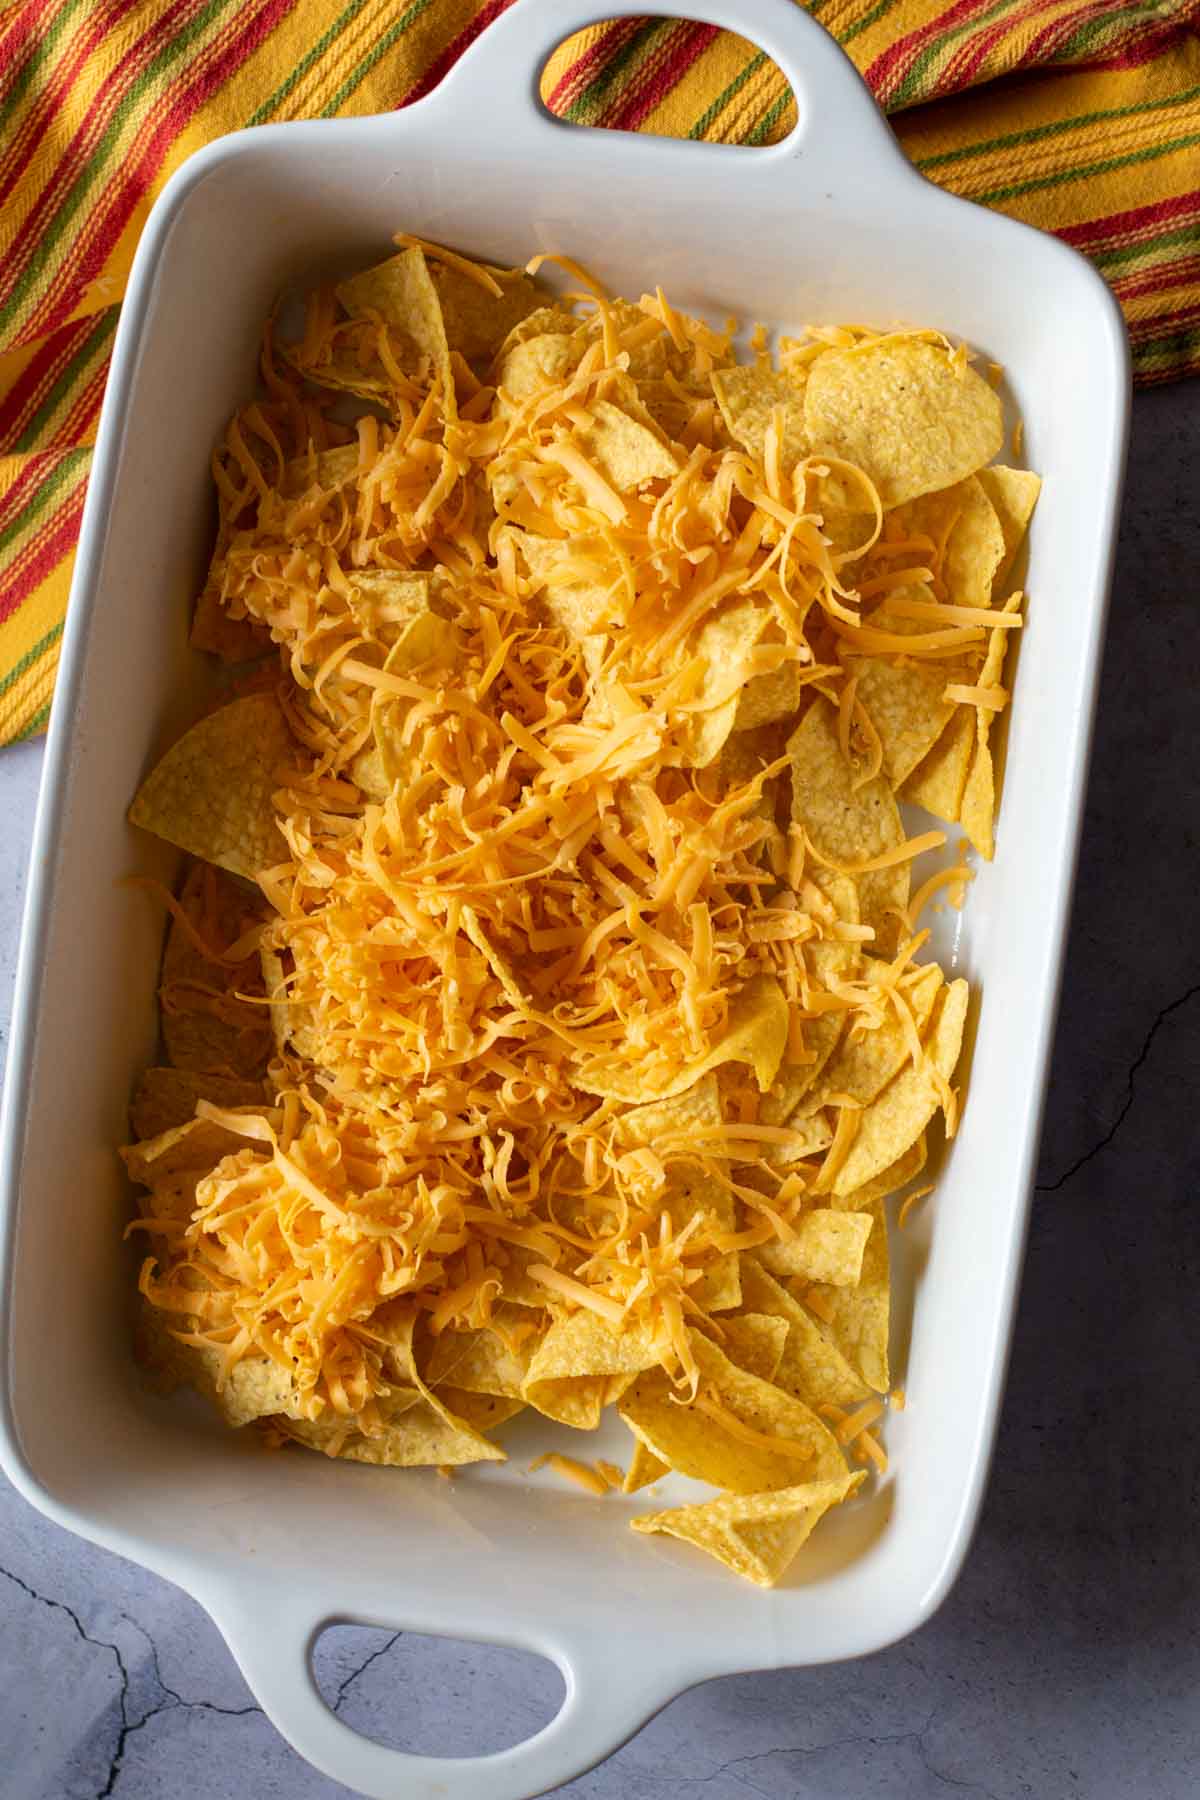 Adding cheese to corn chips in a casserole dish.